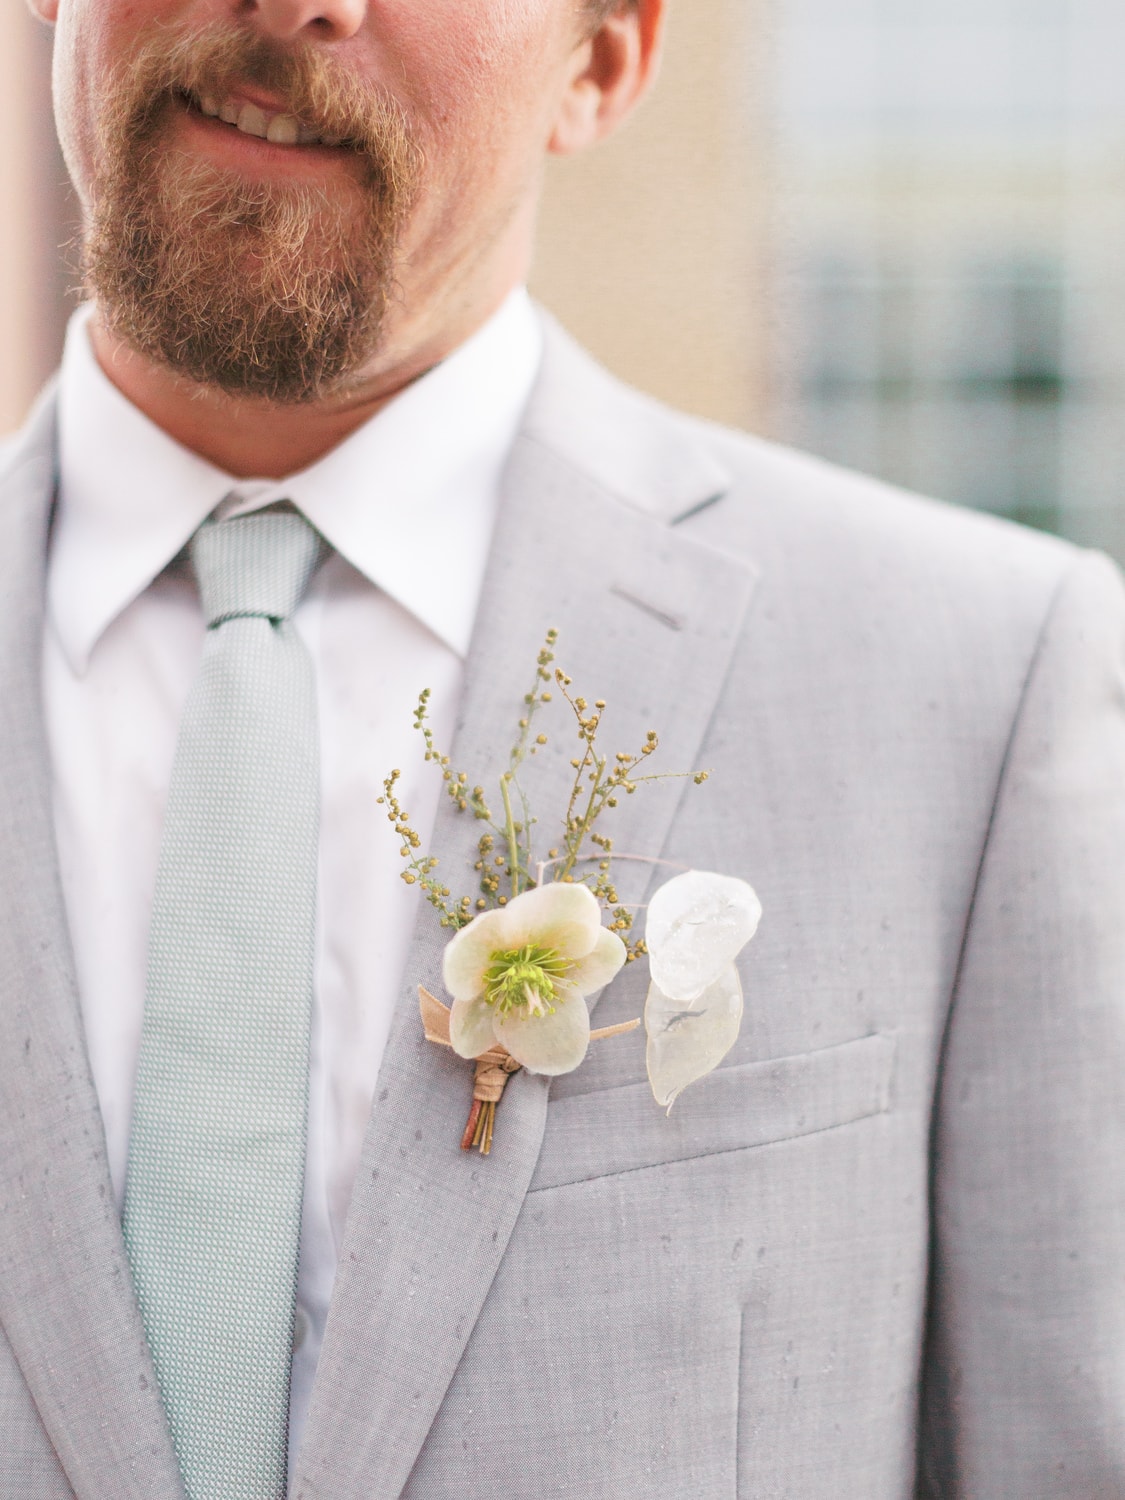 Groom wearing gray suit with boutonniere in Missoula wedding